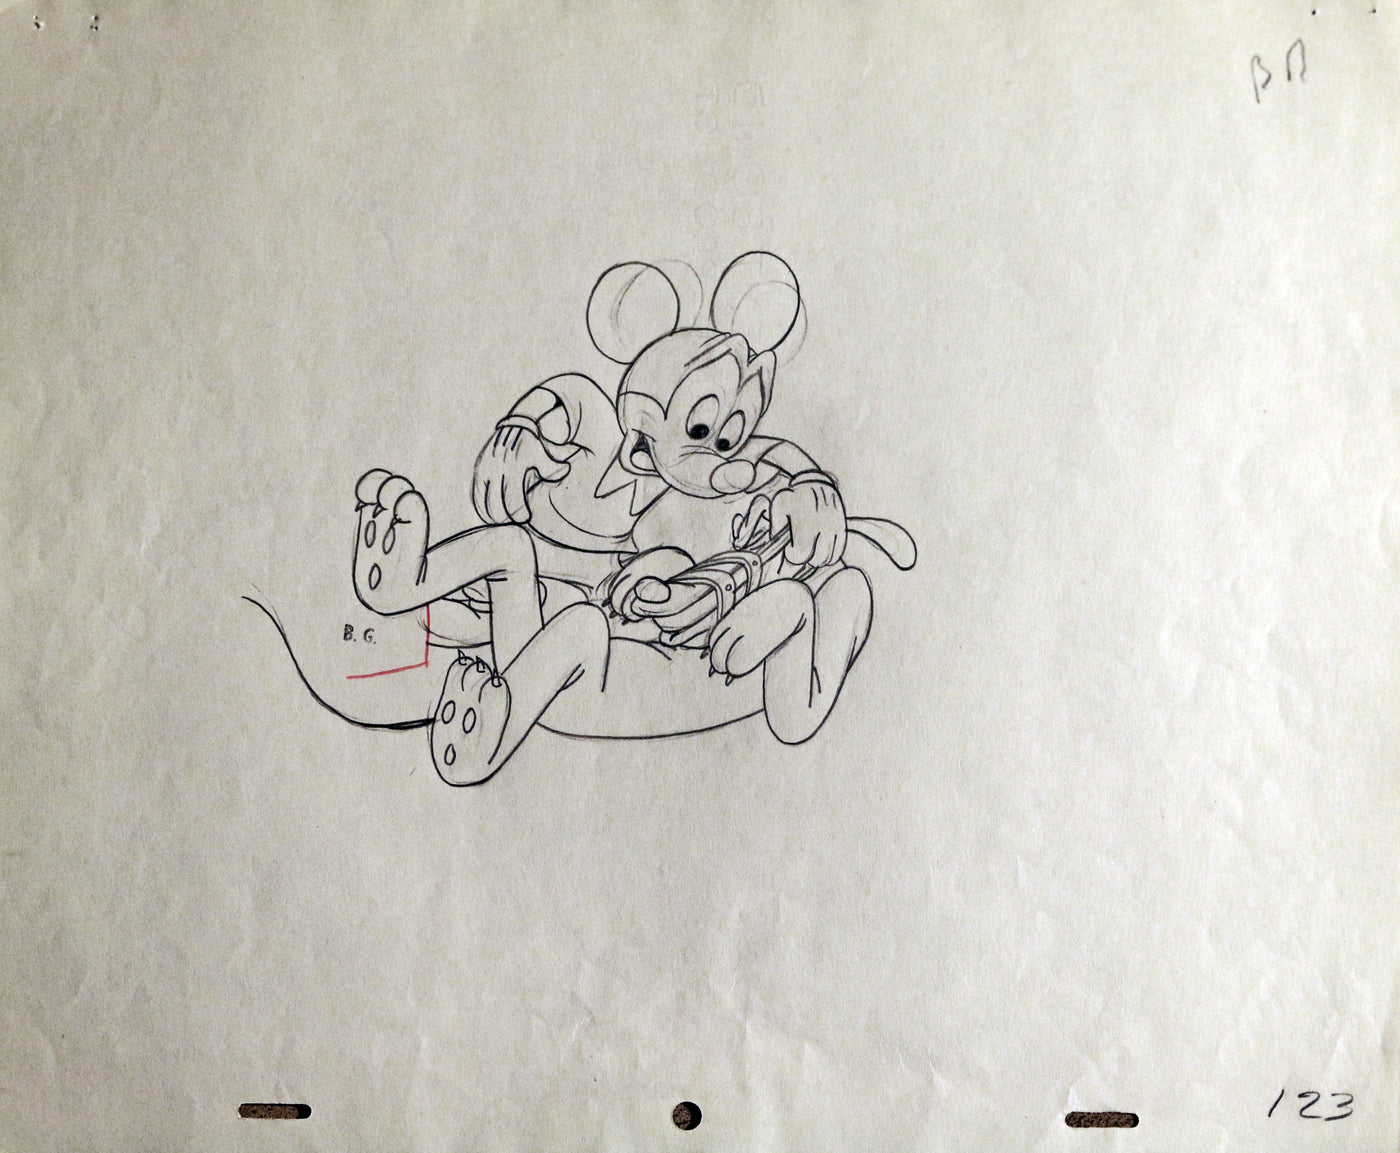 Original Walt Disney Production Drawing of Mickey Mouse and Pluto from Plutopia (1951)